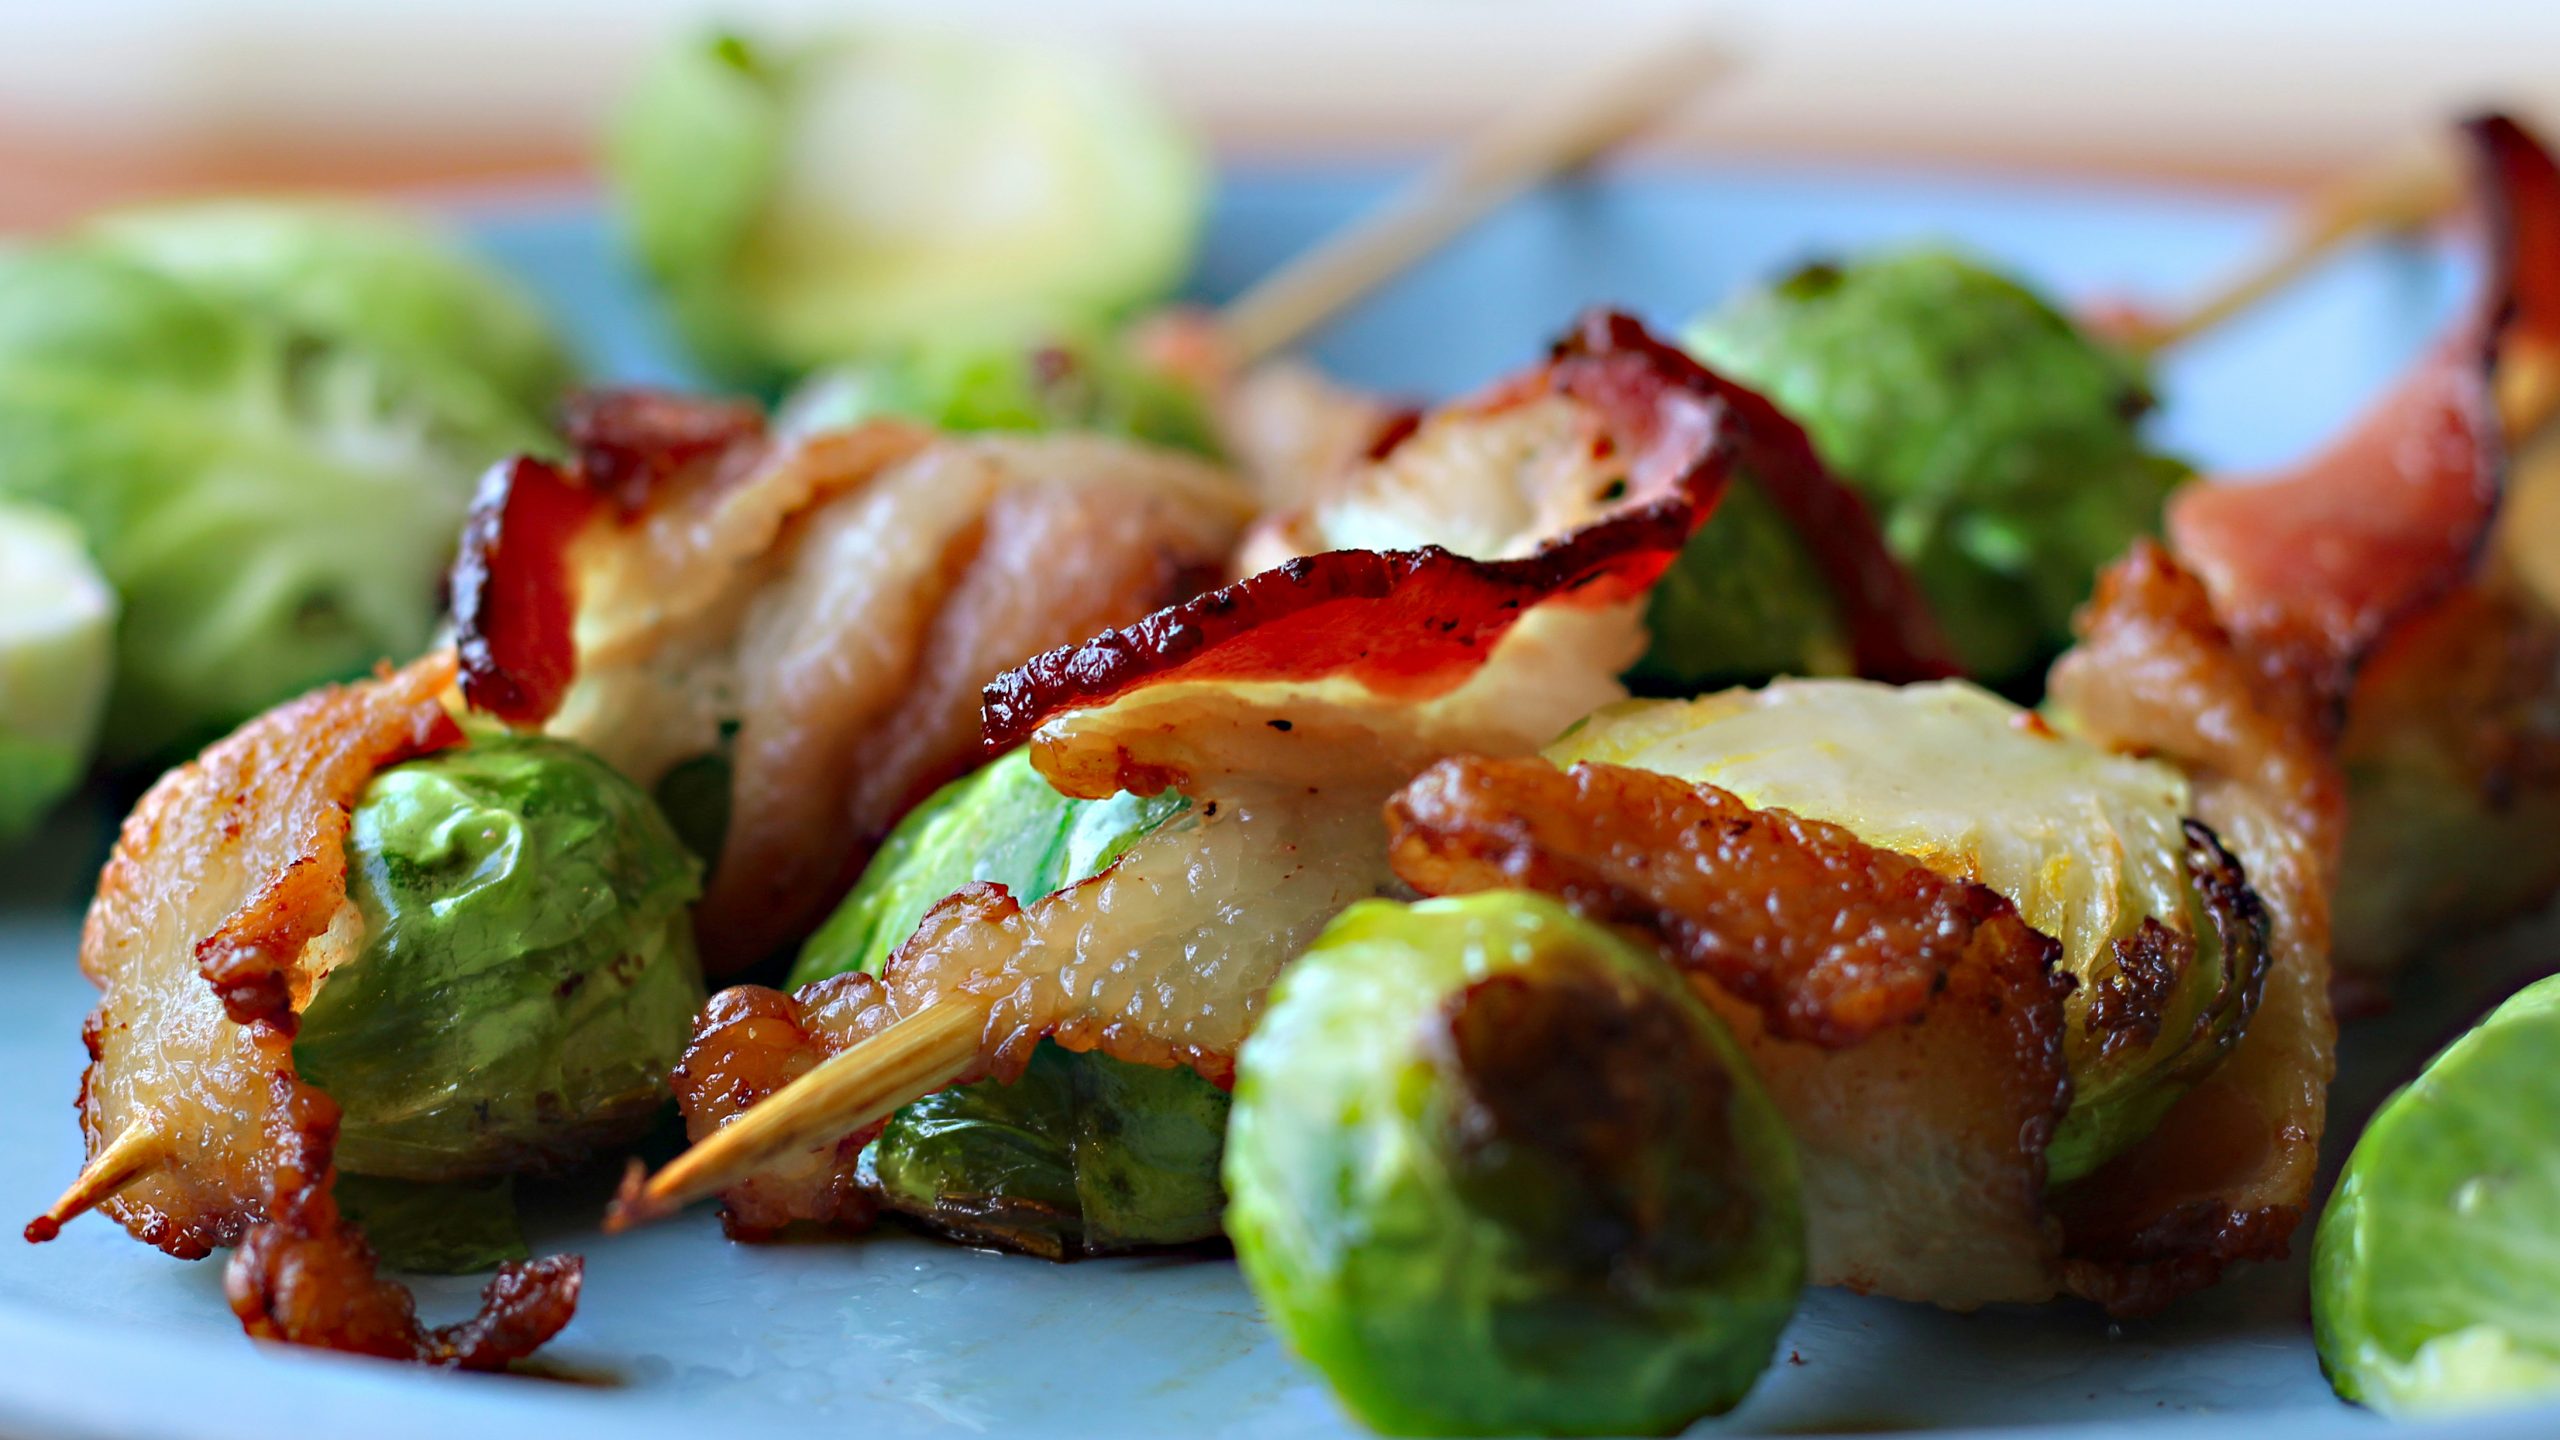 BBQ Bacon & Brussels Sprouts Skewers